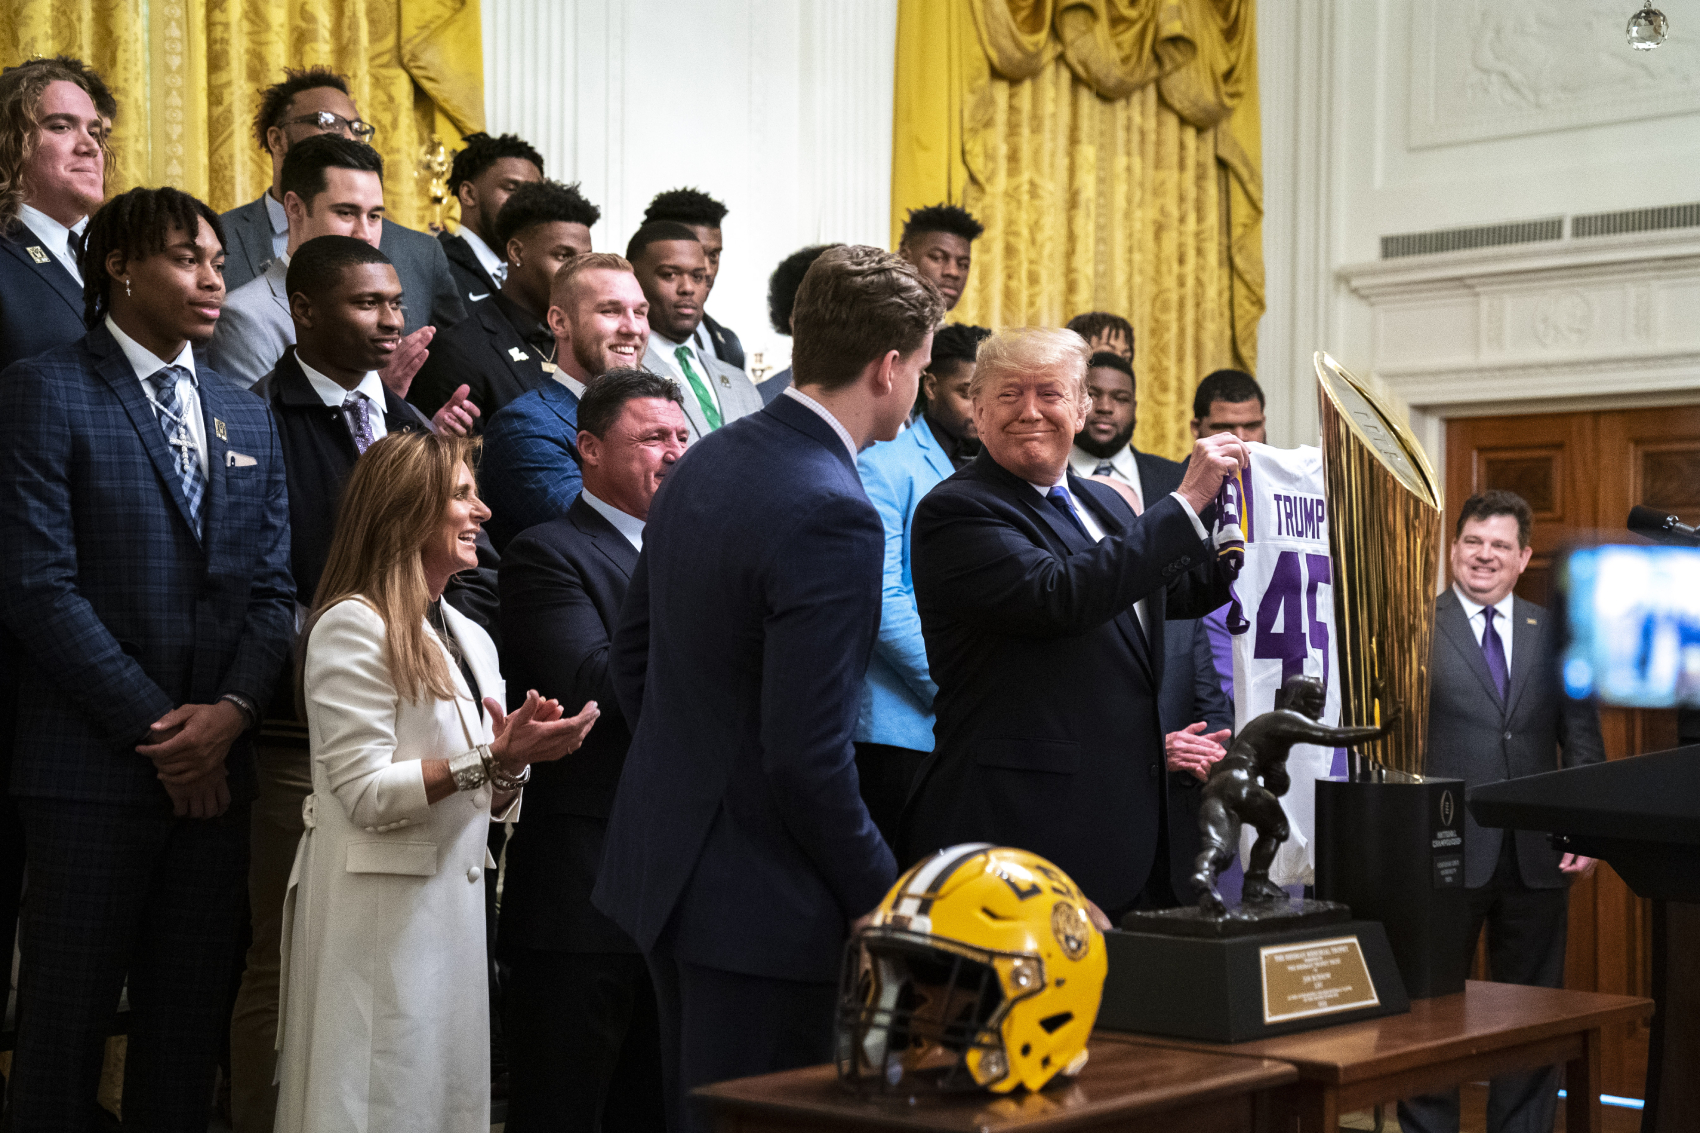 President Donald Trump talked about football in a conference call recently, and he made multiple false statements while discussing it.